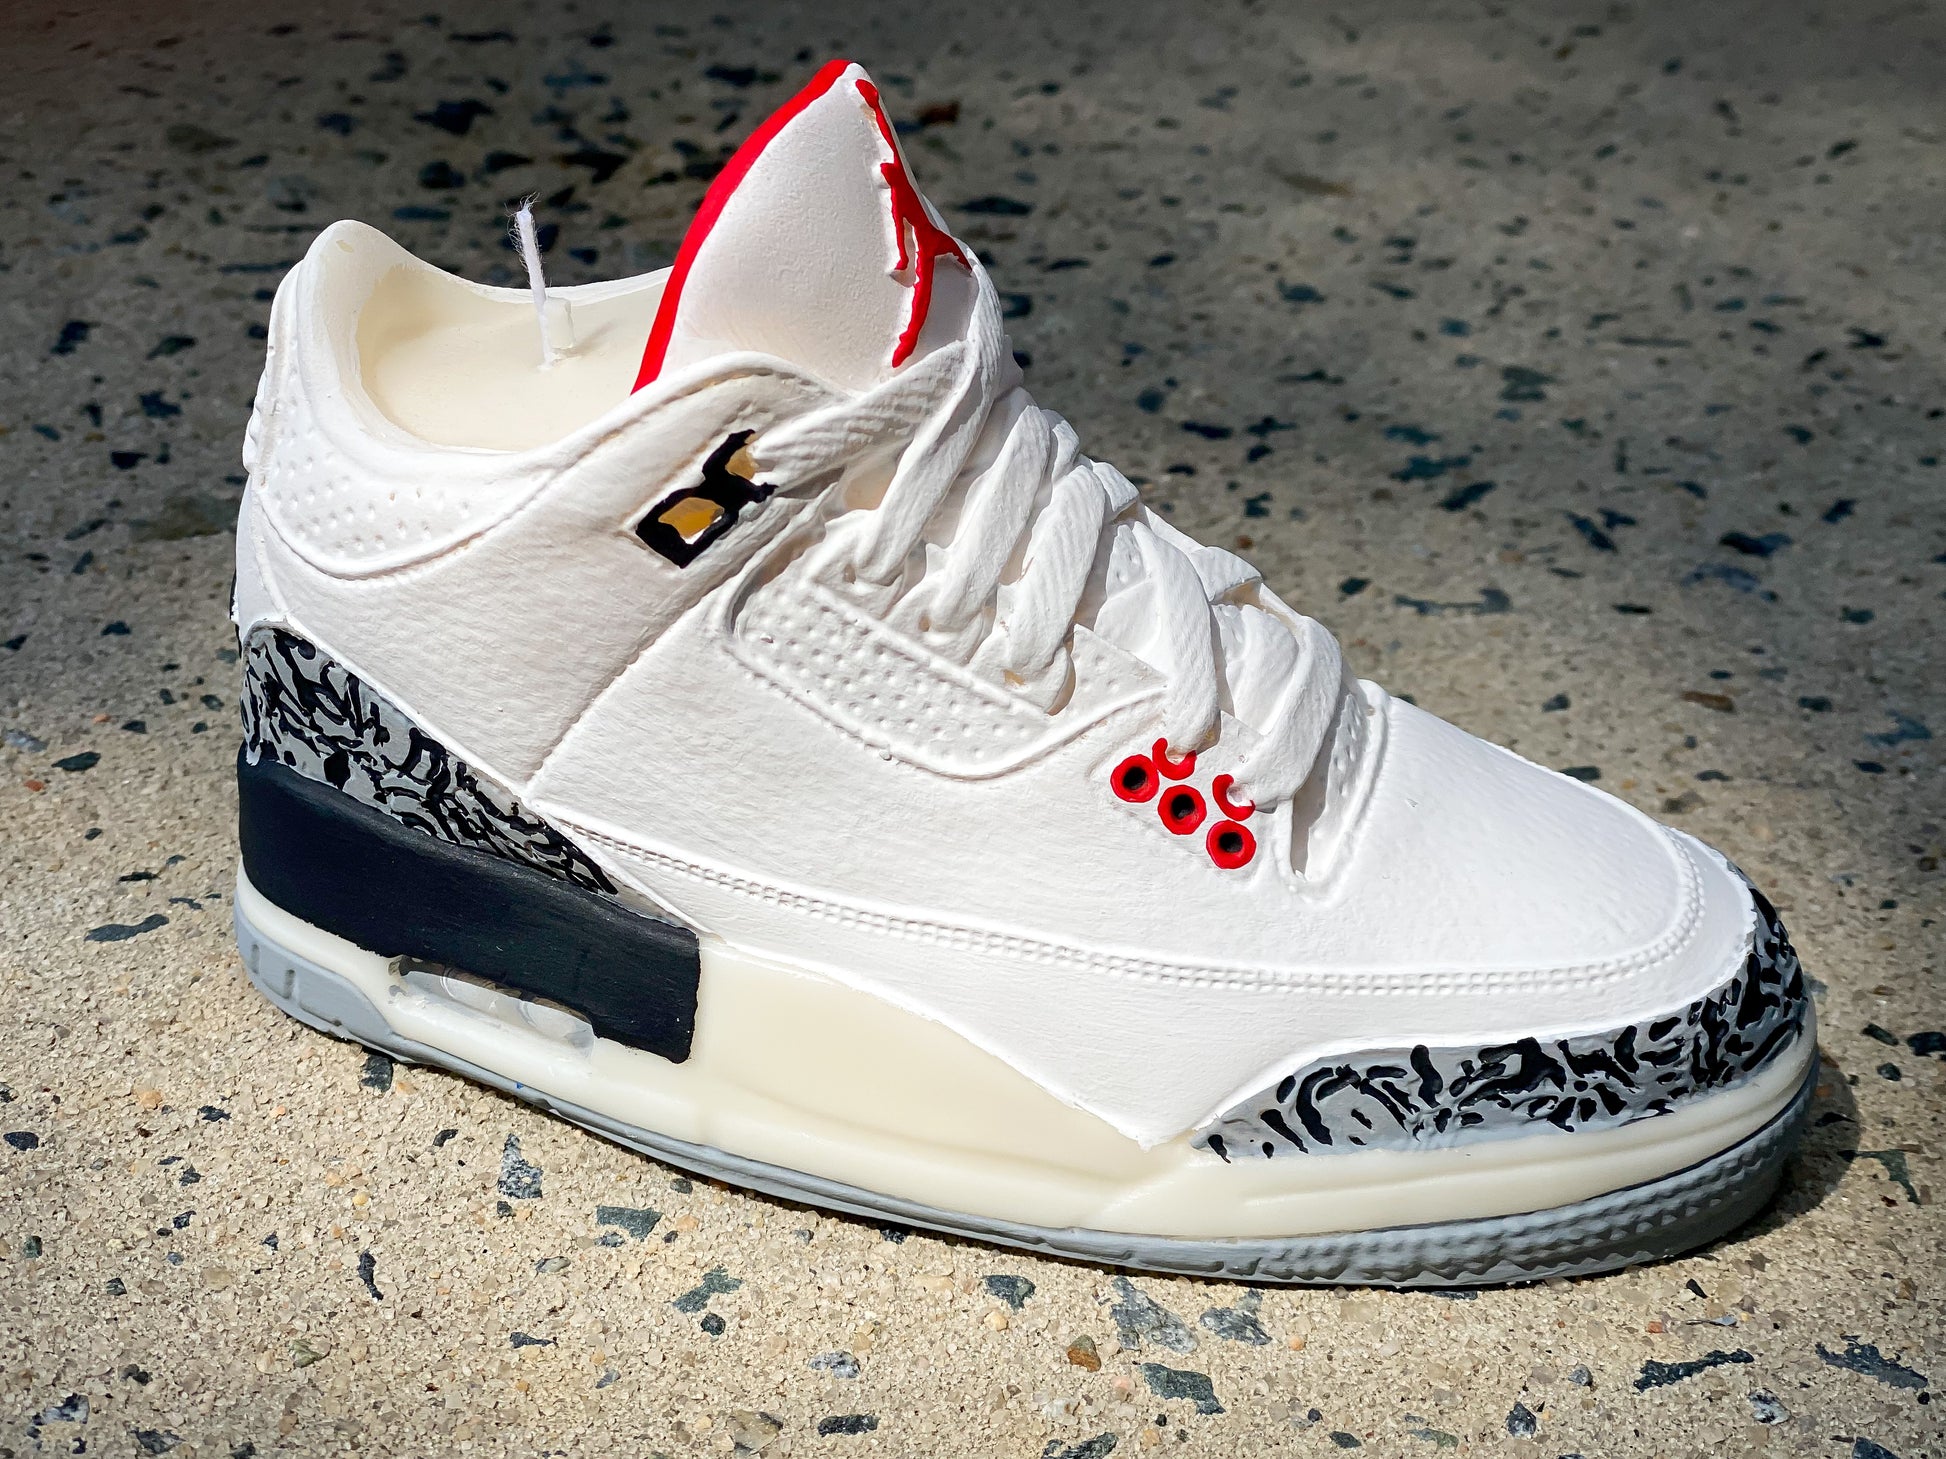 White Cement 3 Sneaker Candle inspired by the retro shoe by Jordan